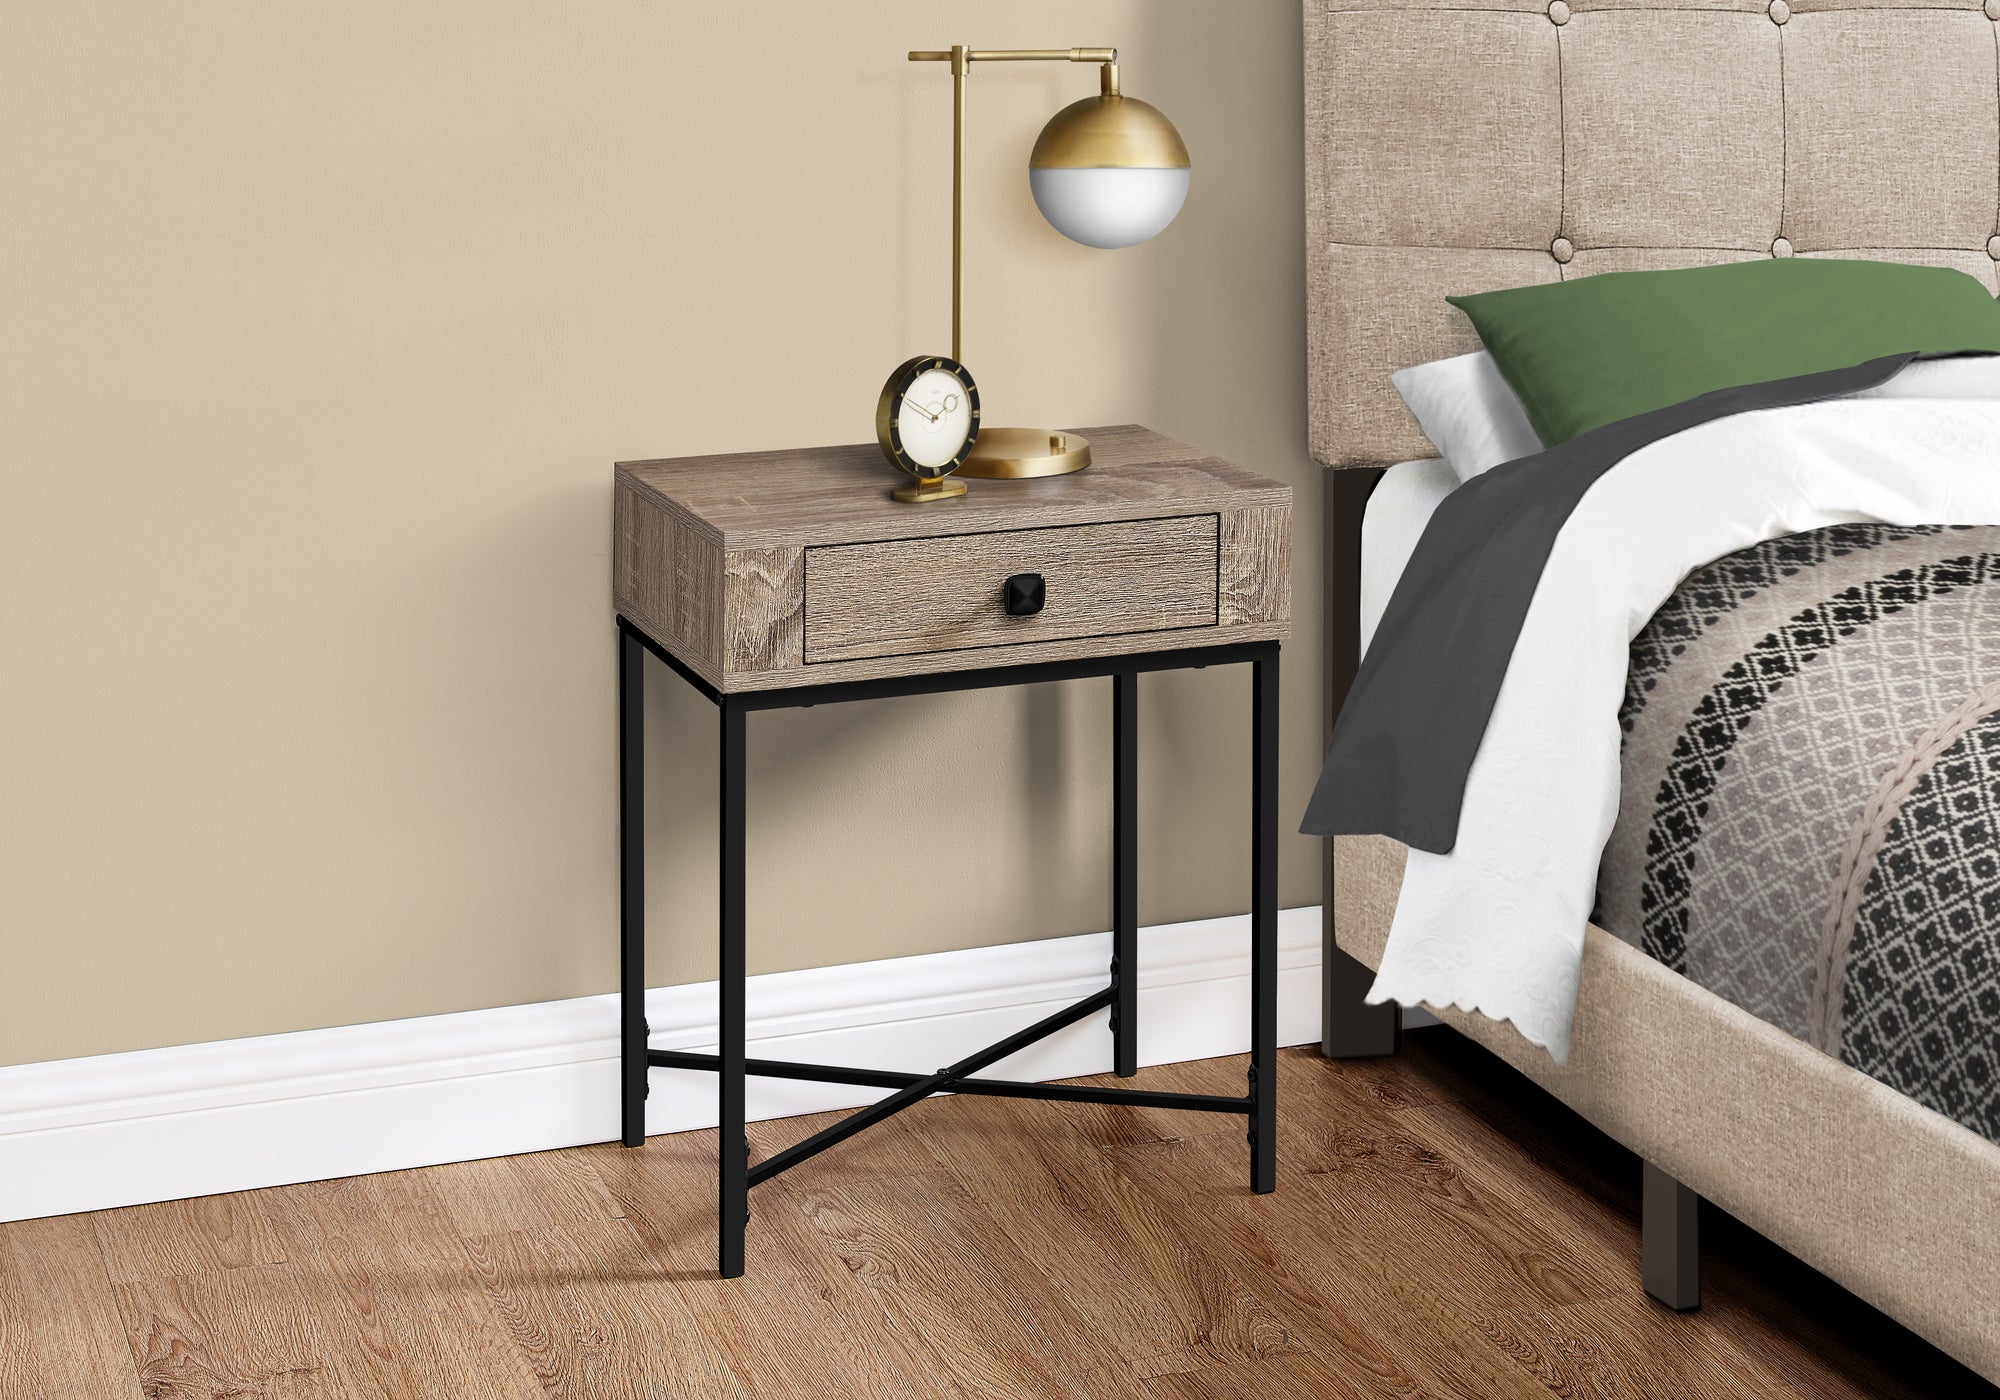 I 3544 - ACCENT TABLE - 22"H / DARK TAUPE / BLACK METAL BY MONARCH SPECIALTIES INC